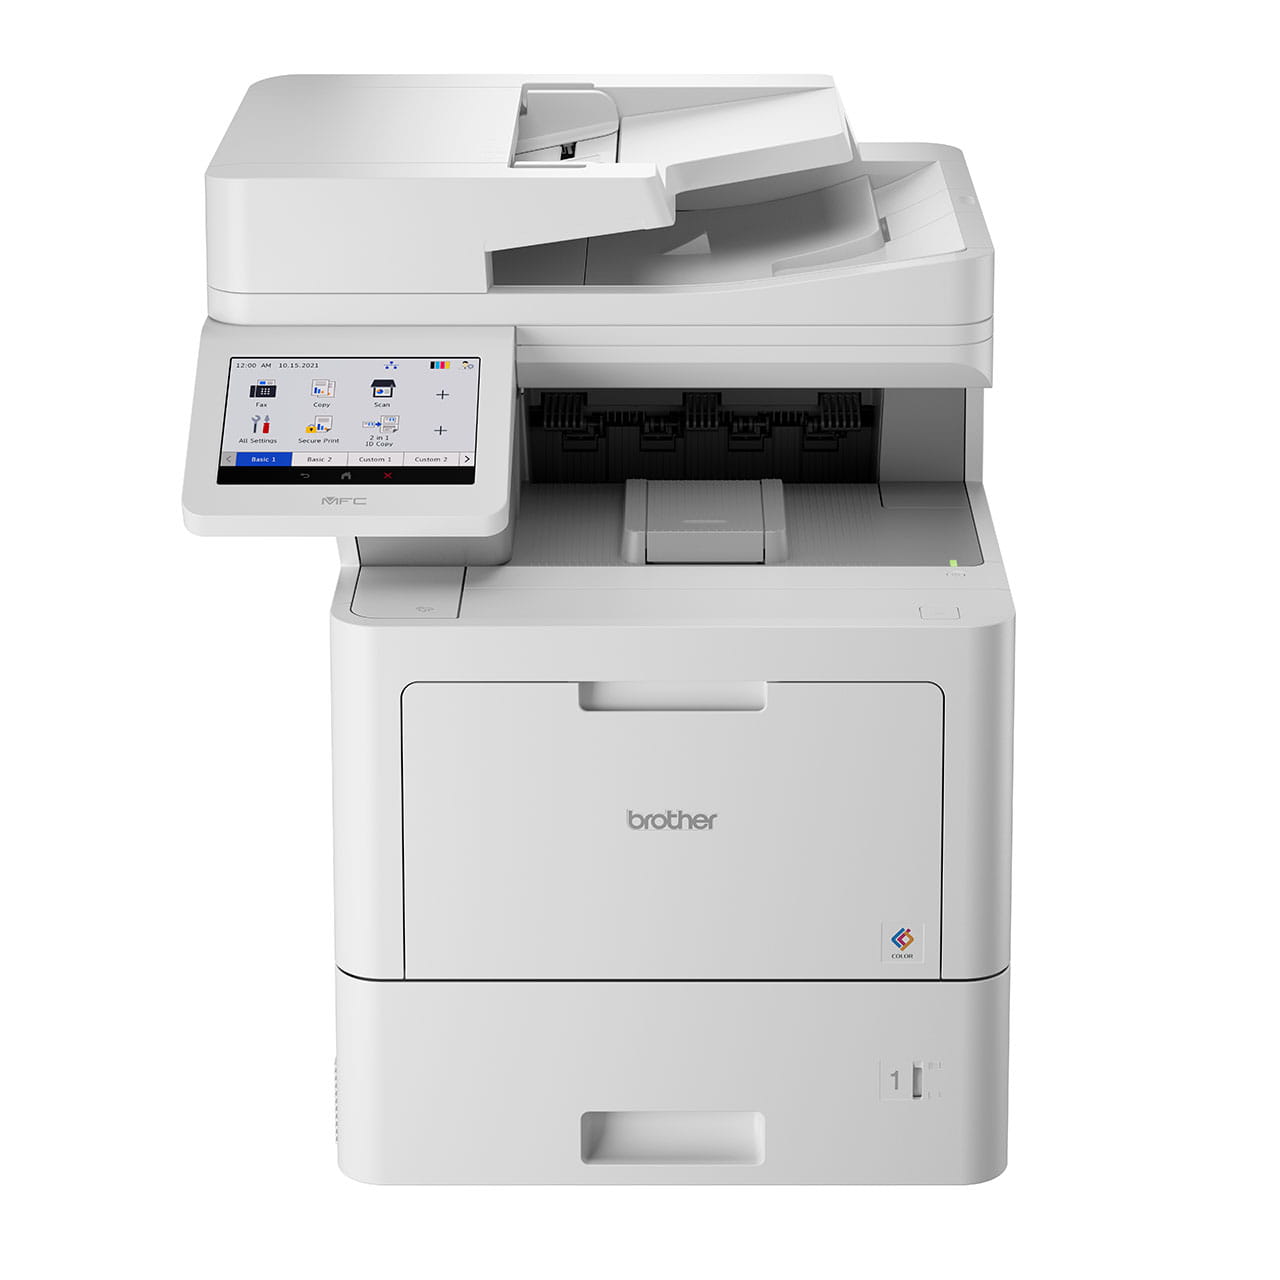 Brother MFC-L9630CDN Colour Laser Printer Front View